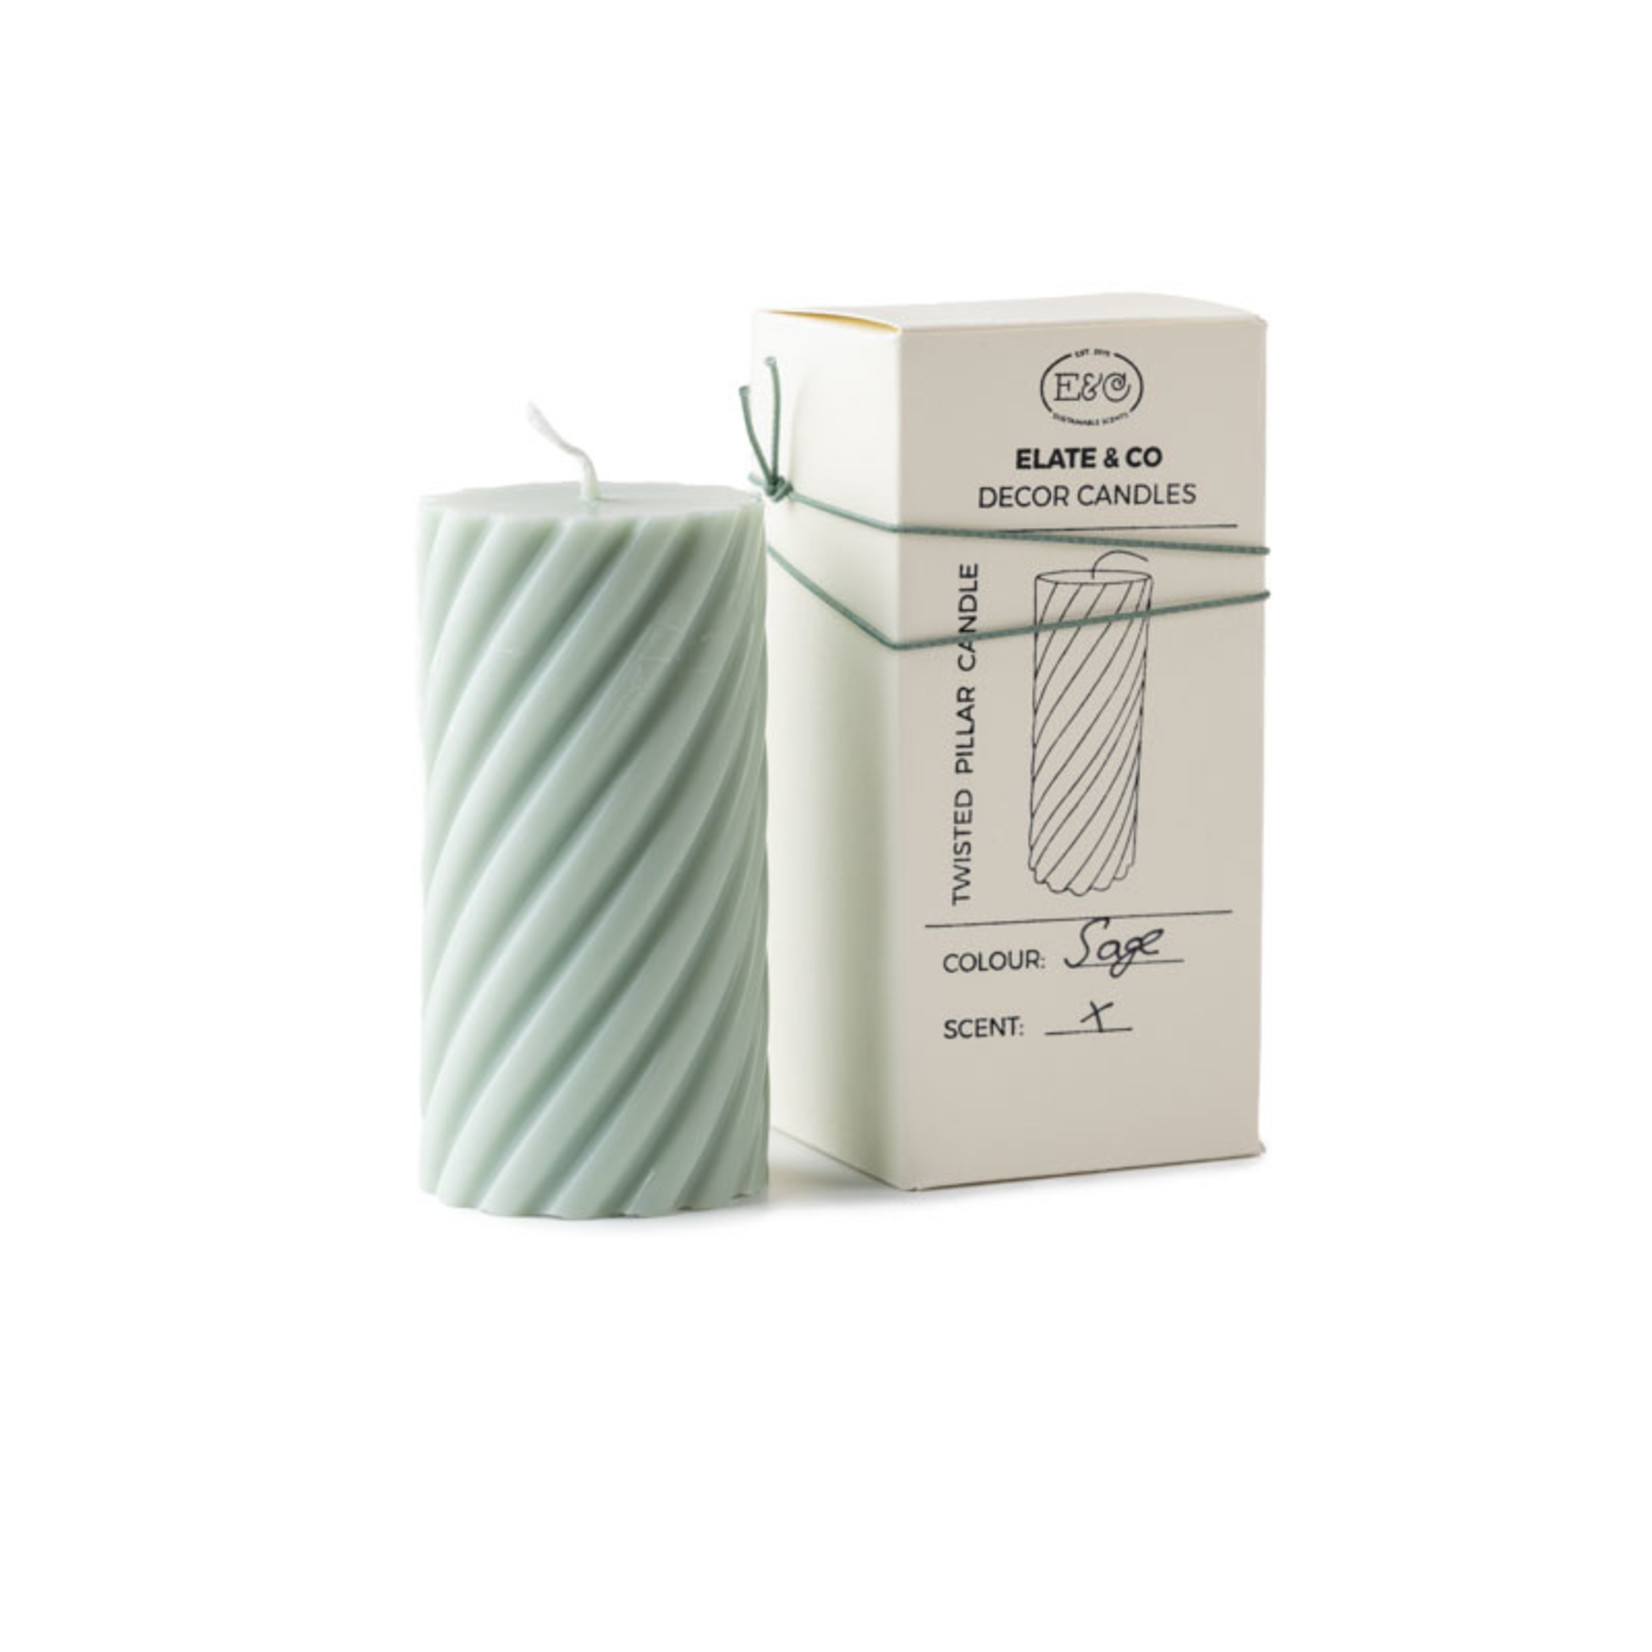 Elate & Co Bubble Candle - Twisted Pillar - Sage